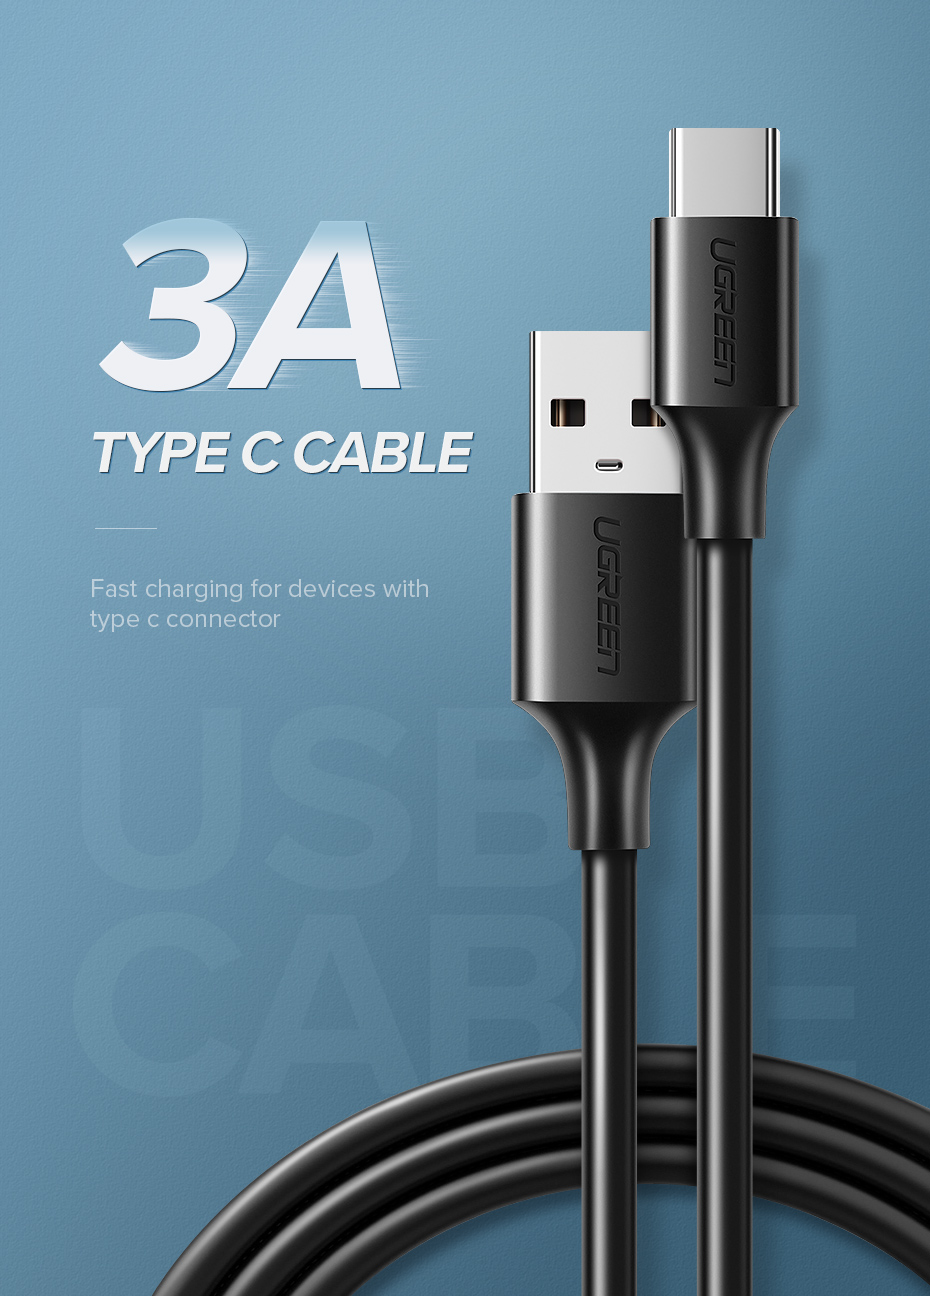 UGREEN USB 2.0 to USB-C data cable Black – 1M | Laptops | Computers ...